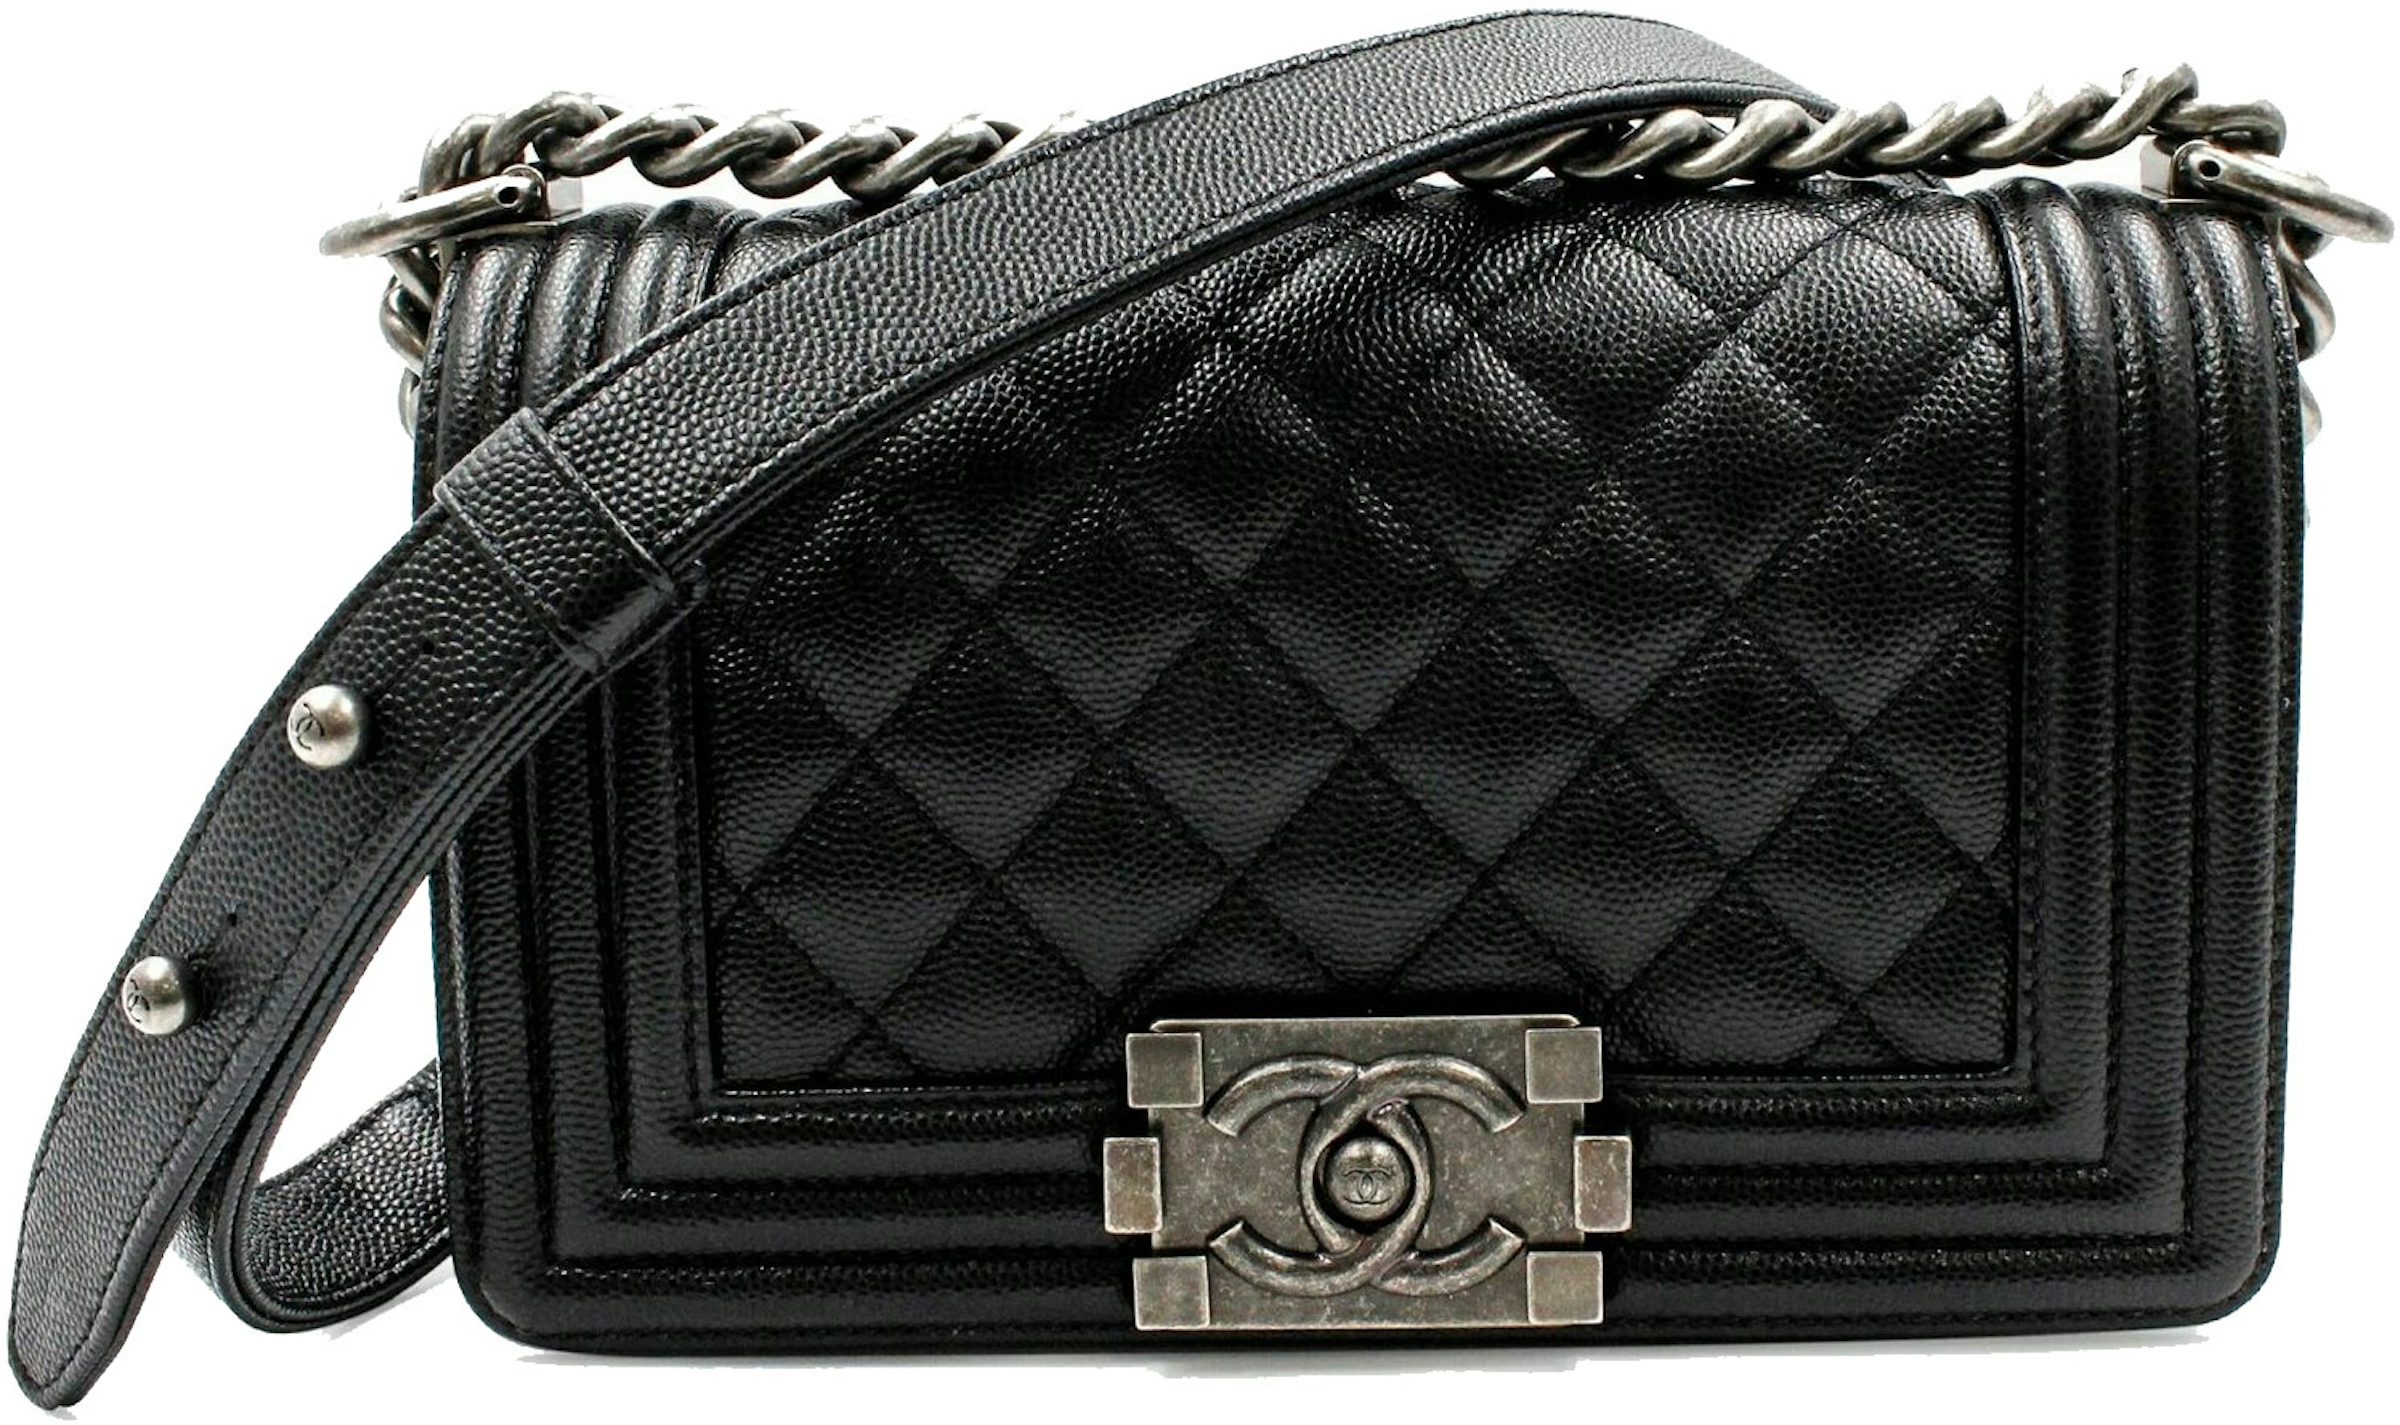 CHANEL, Bags, Chanel Small Boy Bag In Black Calfskin With Ruthenium  Hardware